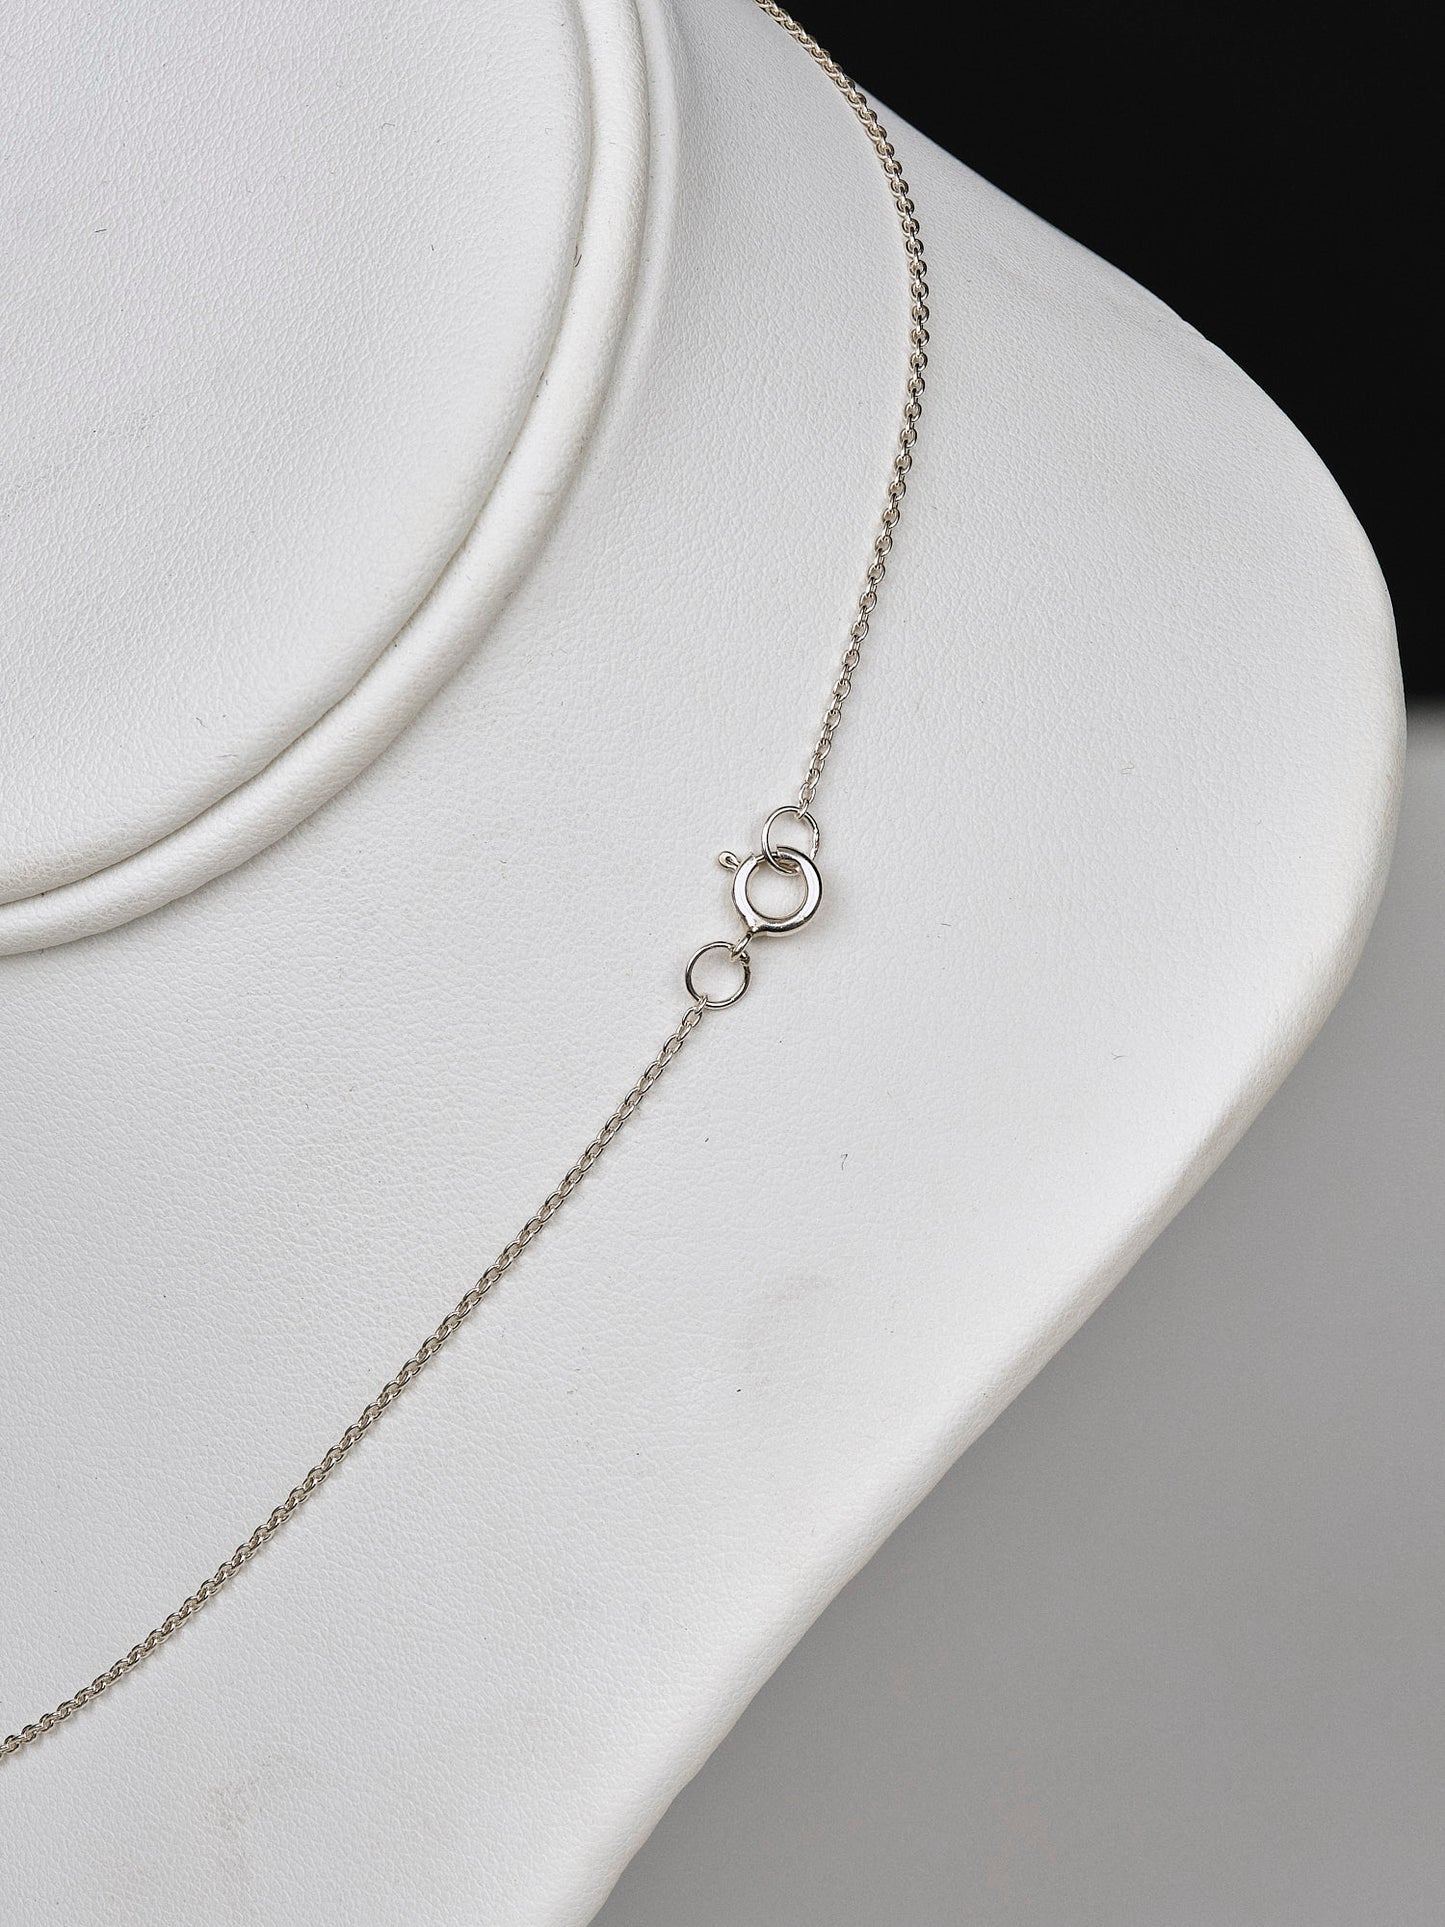 Sterling Silver 40 cm dainty chain necklace